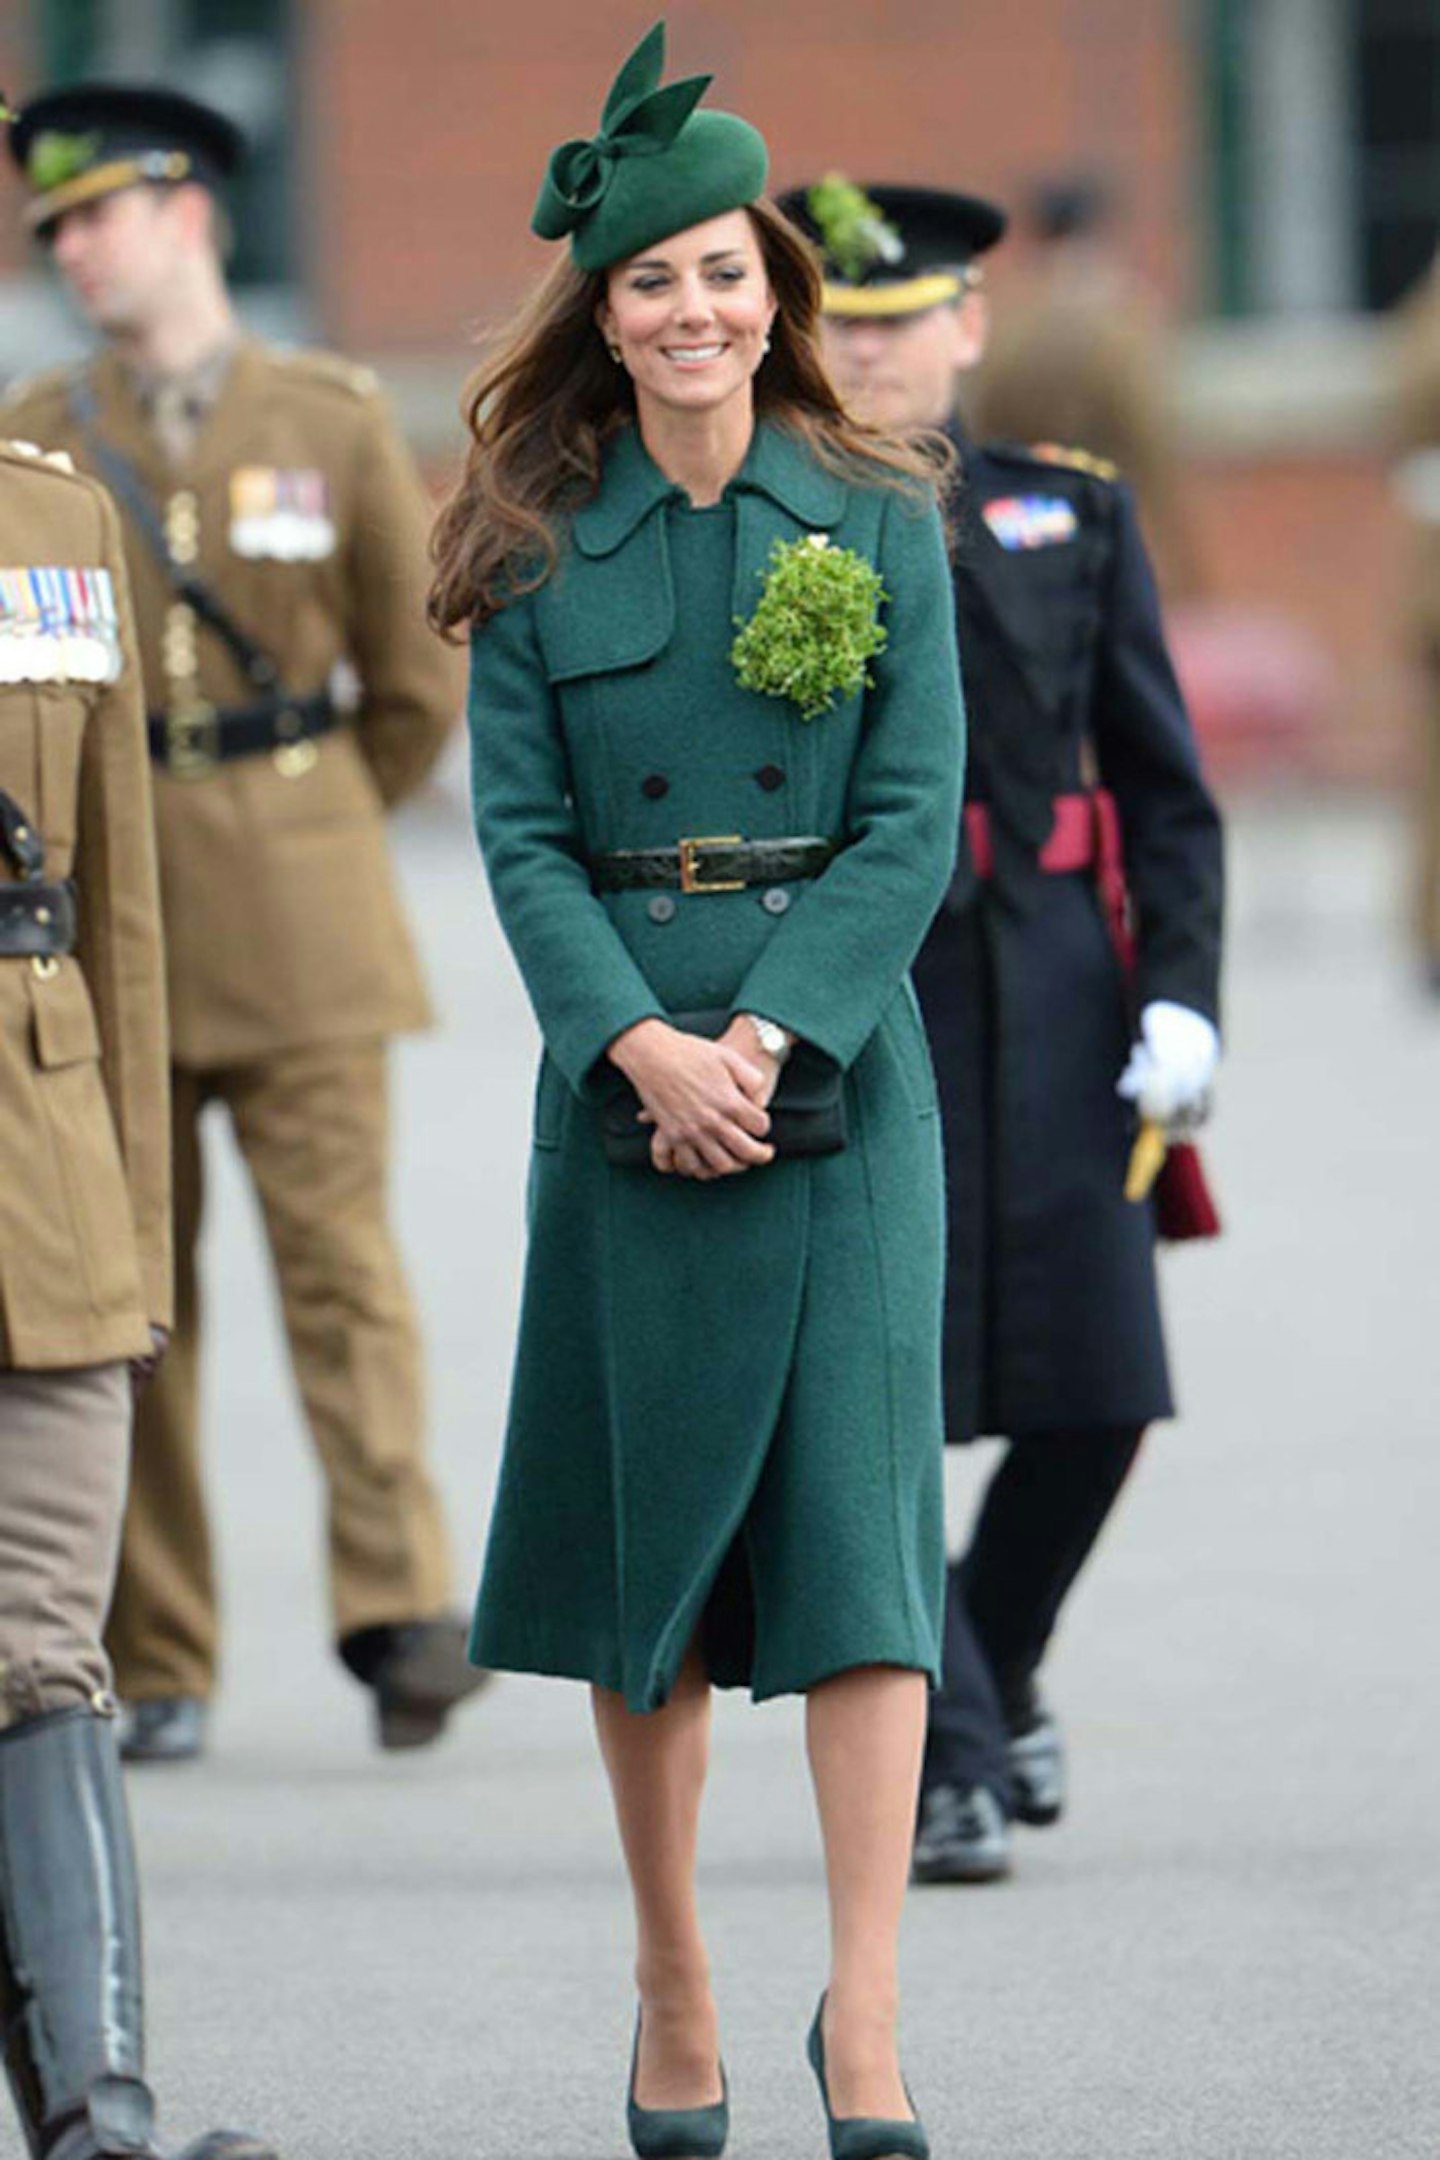 Kate Middleton in Hobbs coat at St Patrick's Day Parade, 17 March 2014